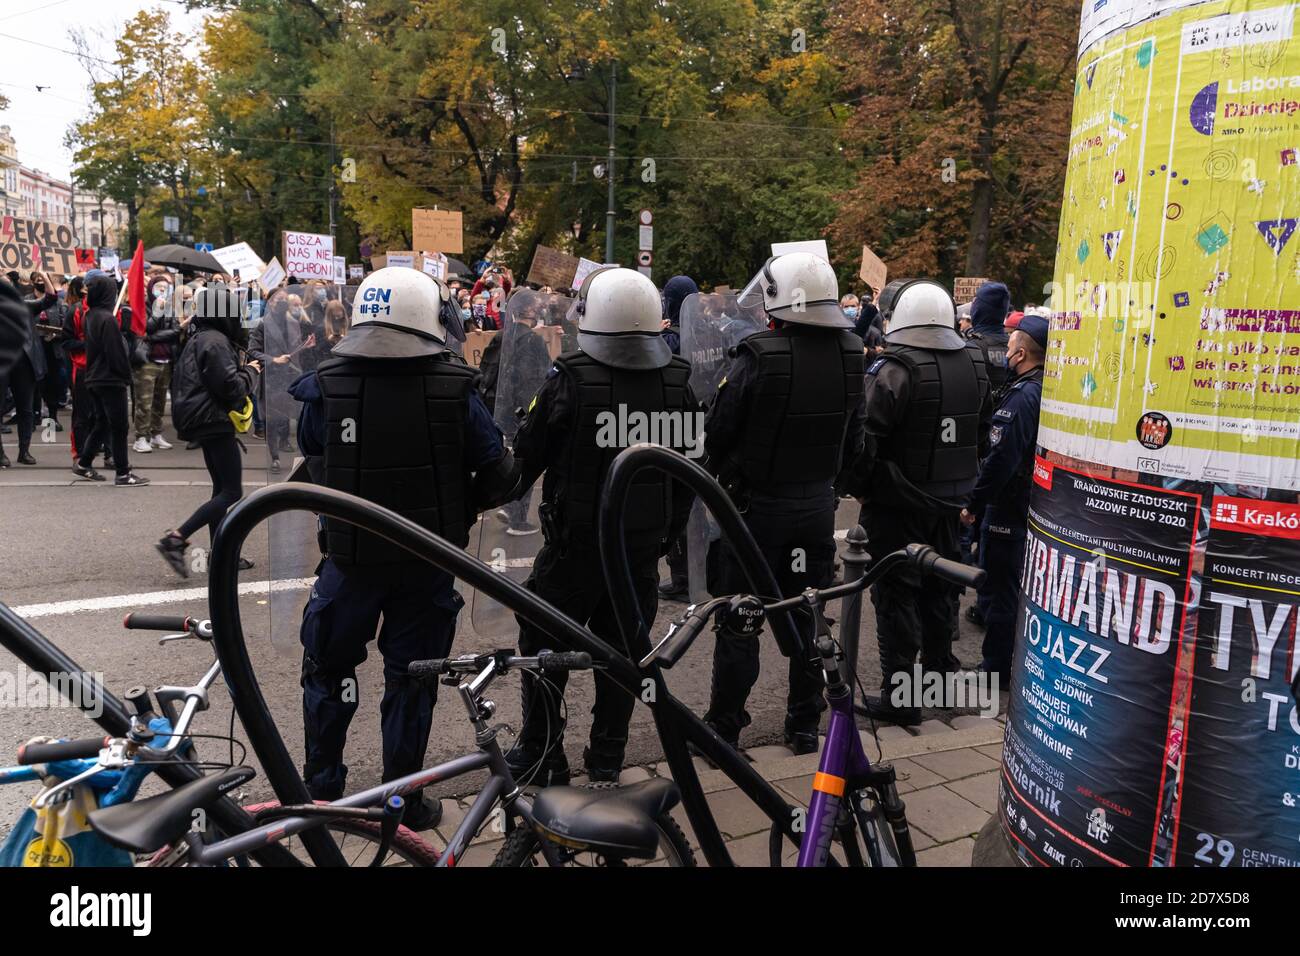 Krakow, Poland - October 25, 2020: Police on duty and Polish people protesting against a legislative proposal for a total ban of abortion in the main Stock Photo